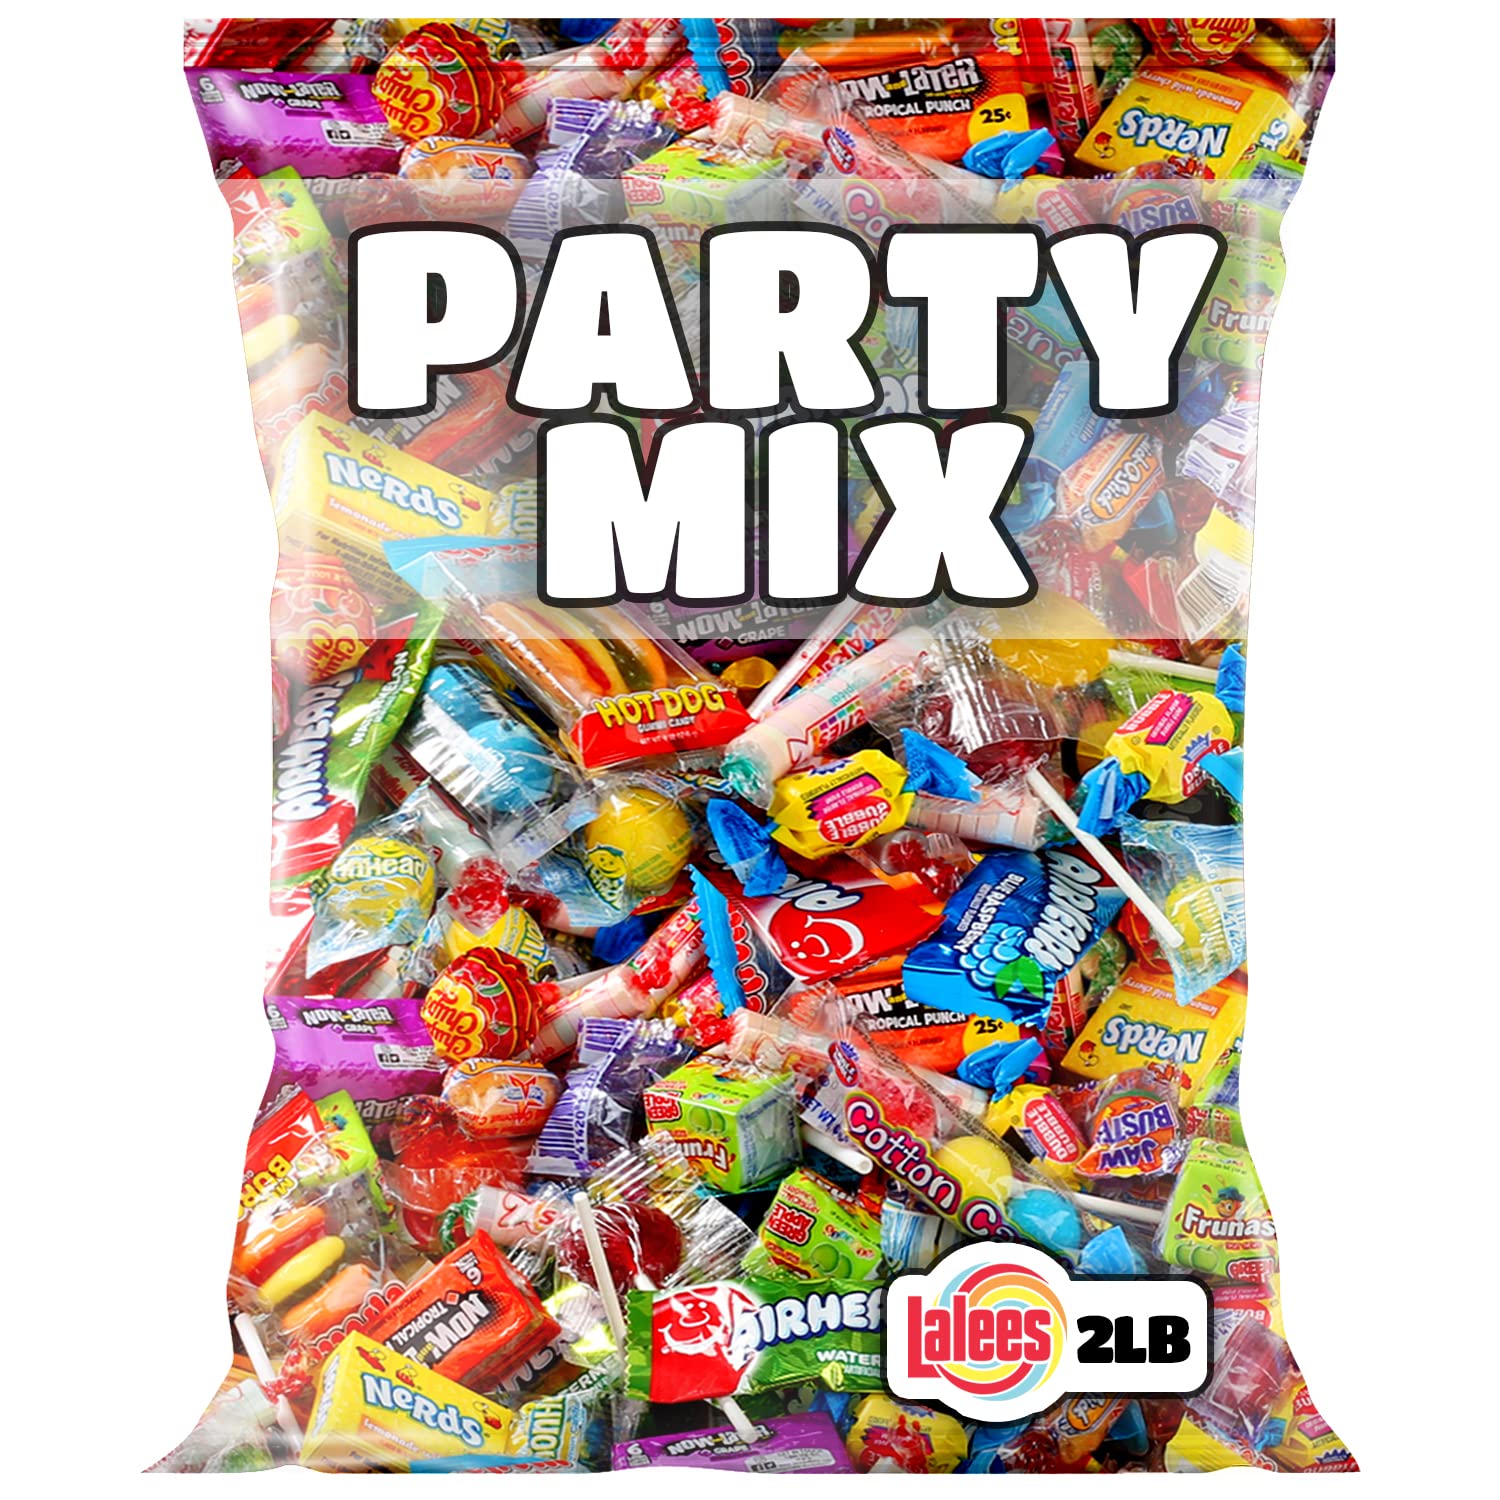 Sour Candy Variety Pack - 4 Pounds - Bulk Candy - Individually Wrapped  Candy - Assorted Pinata Candy - Candy For Goodie Bags - Party Favors For  Kids